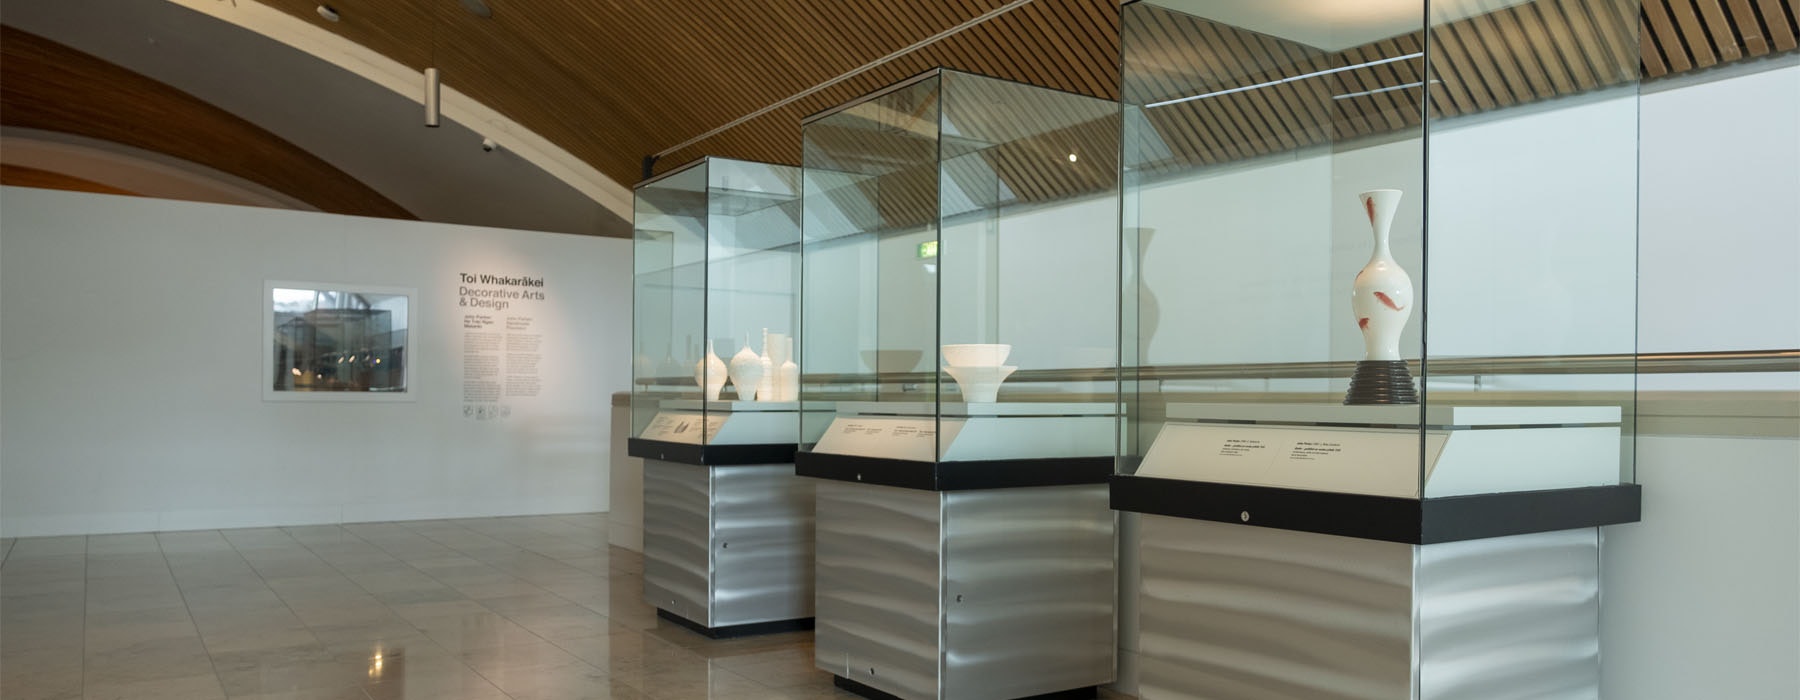 View of the John Parker exhibition, showing three glass plinths containing sculptures